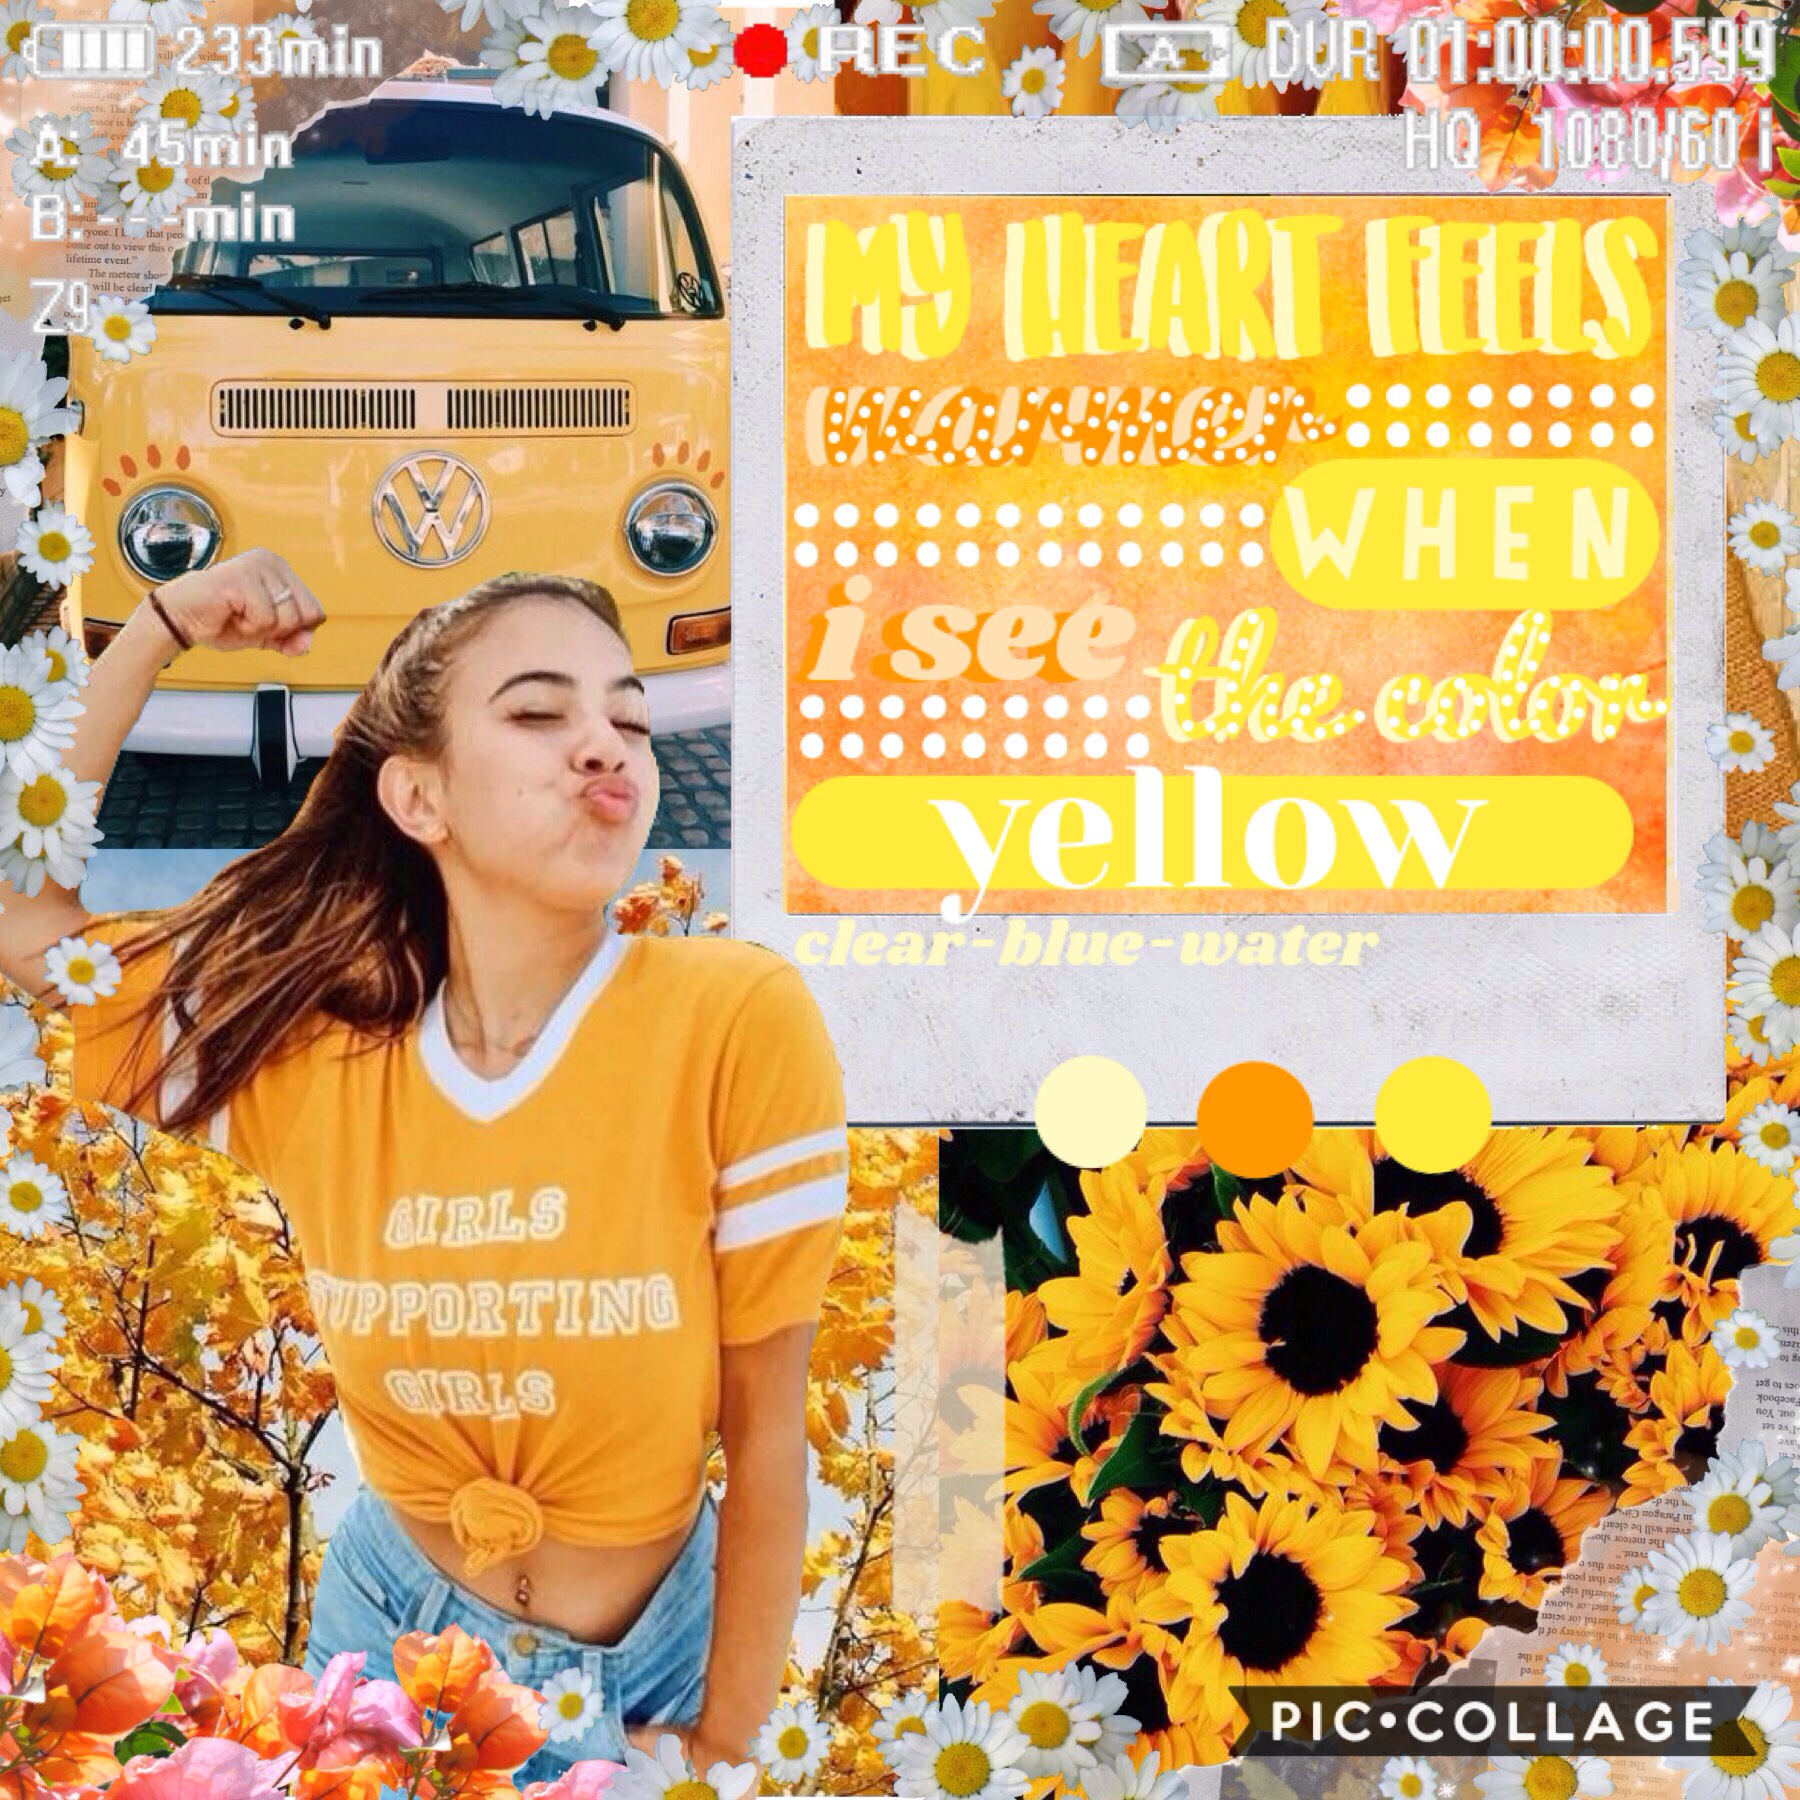 🍋T A P🍋
I made this for AlishaMarieSummer-Extra's YouTuber games. Hope you like it! There will be voting up soon on her account so please vote for your favorite collages.
QOTD: What is your favorite color?
AOTD: Rn I'm into yellow and rose gold but it alw